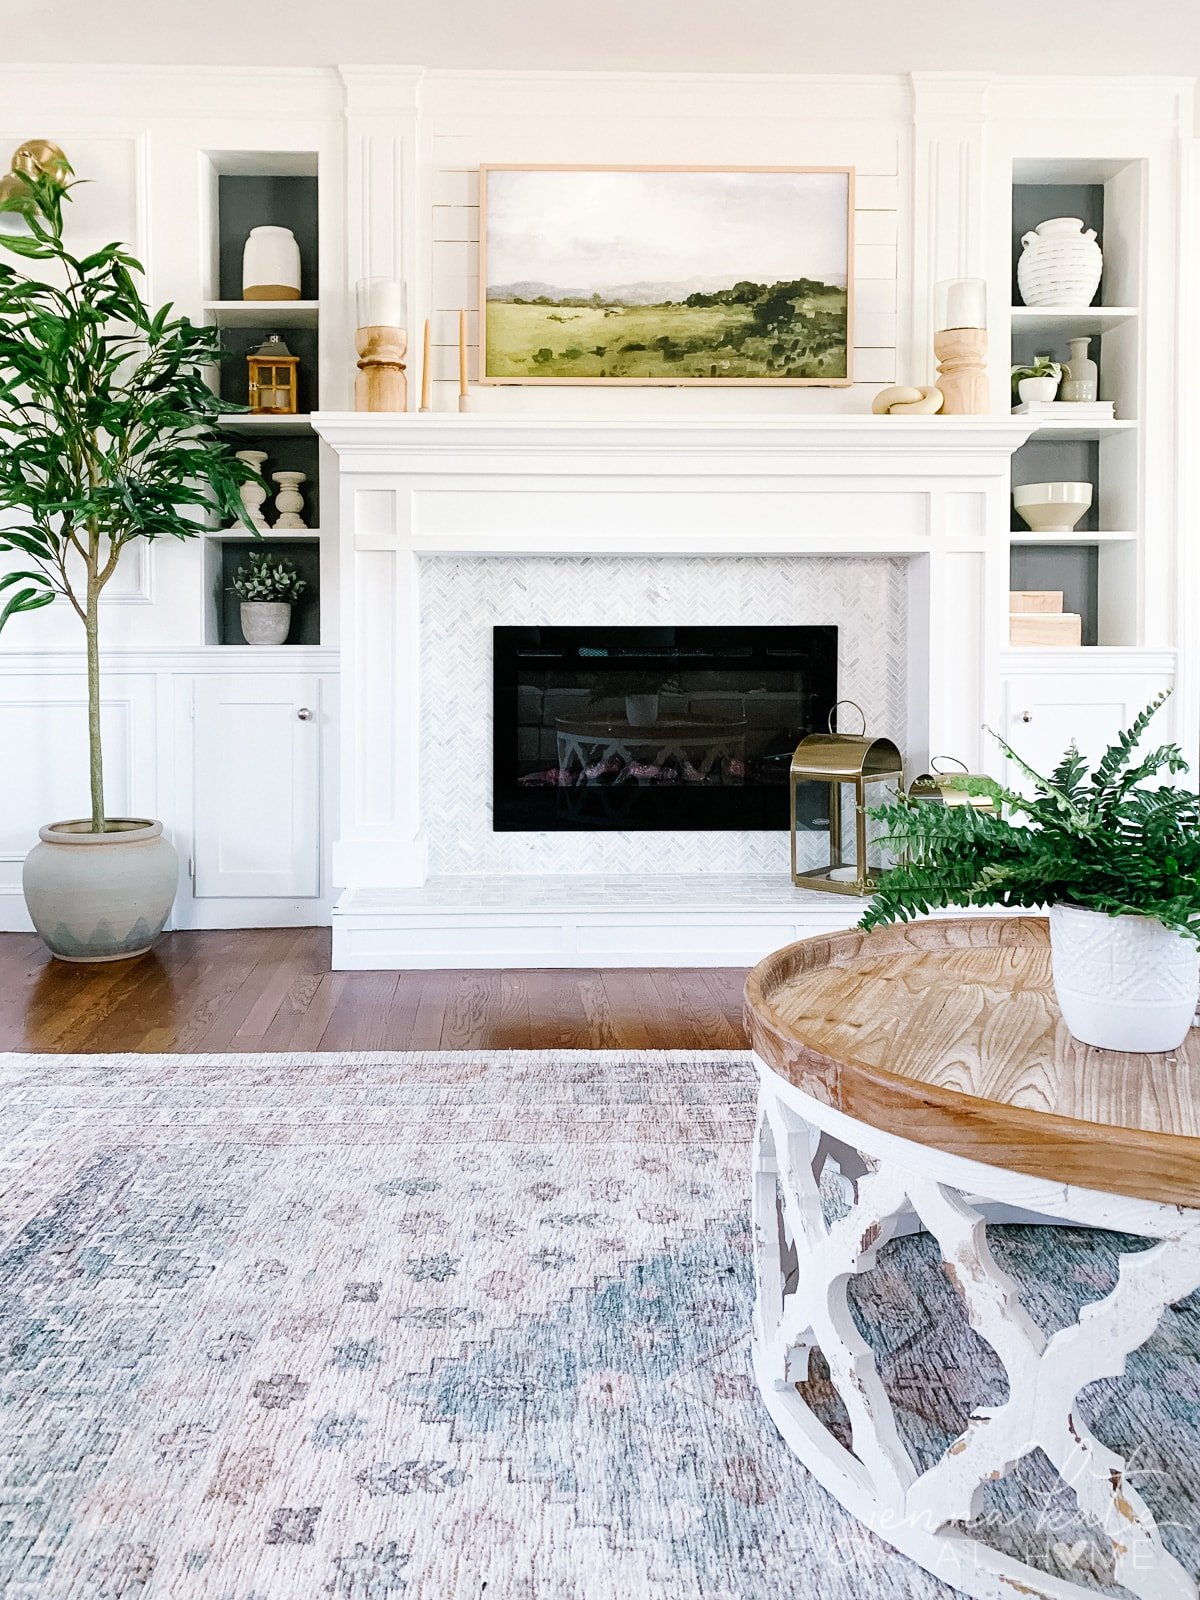 5 Reasons Your Home Decor Does Not Look Cohesive